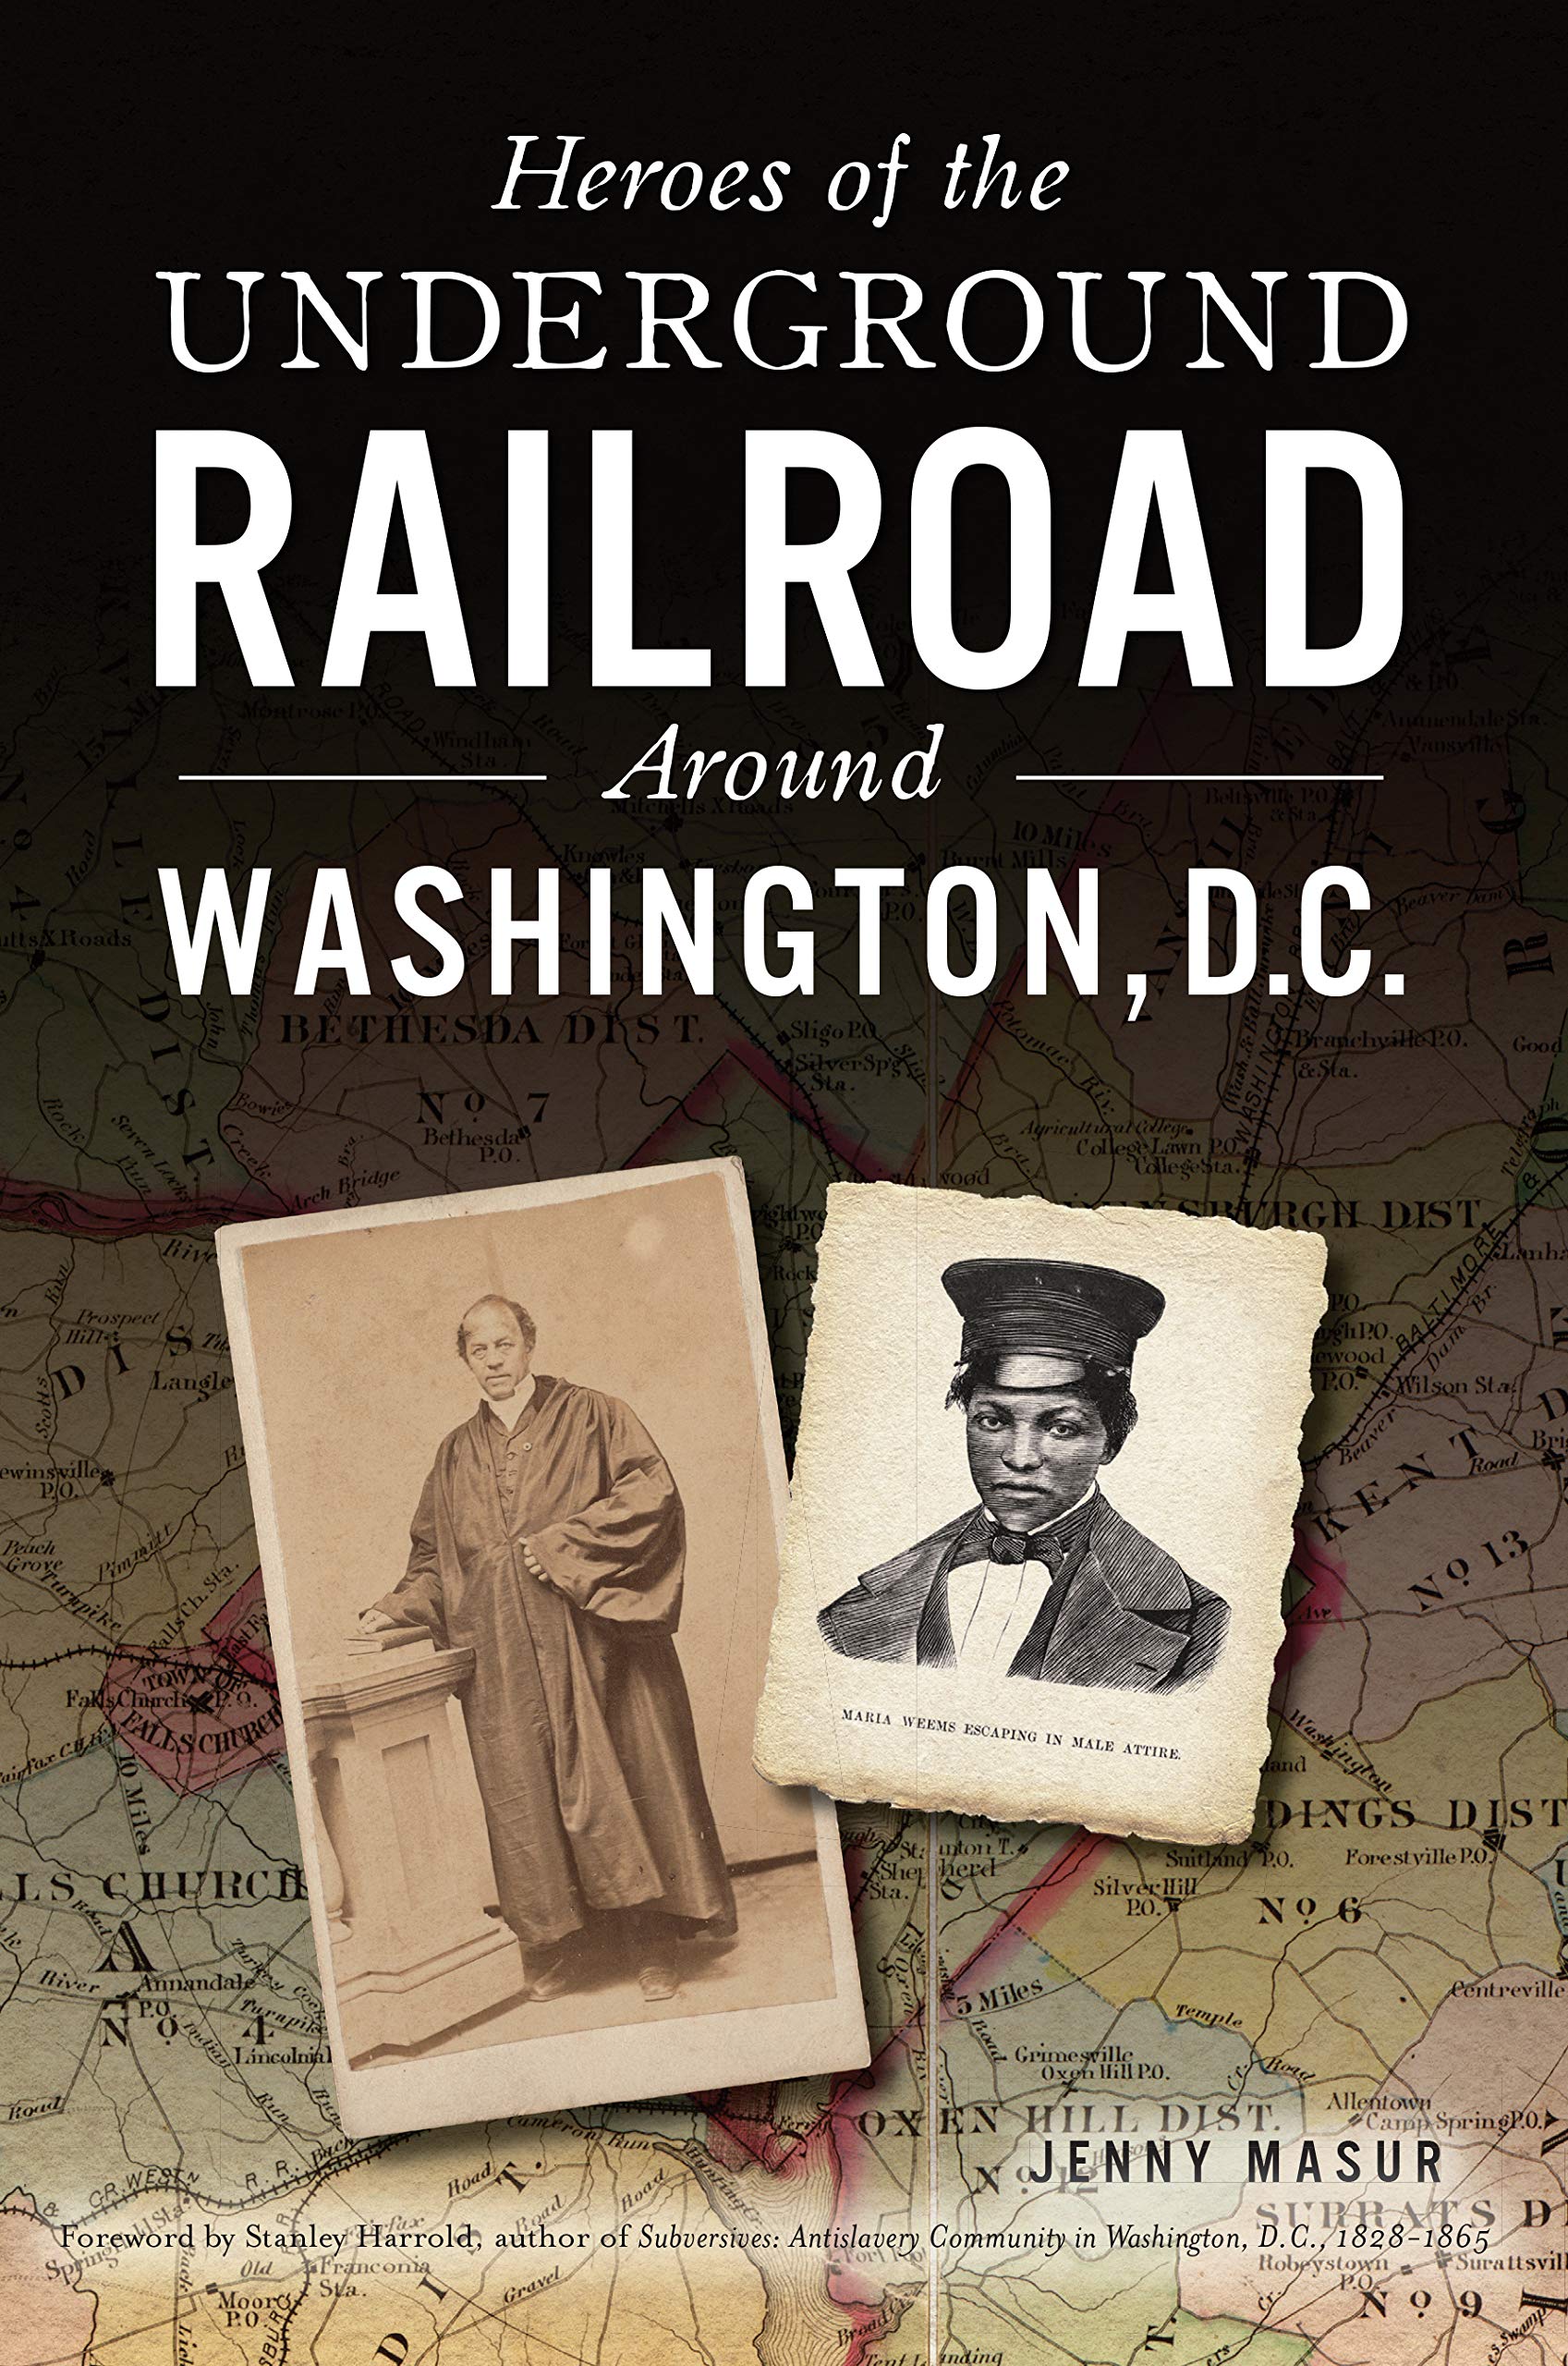 the underground railroad book sparknotes